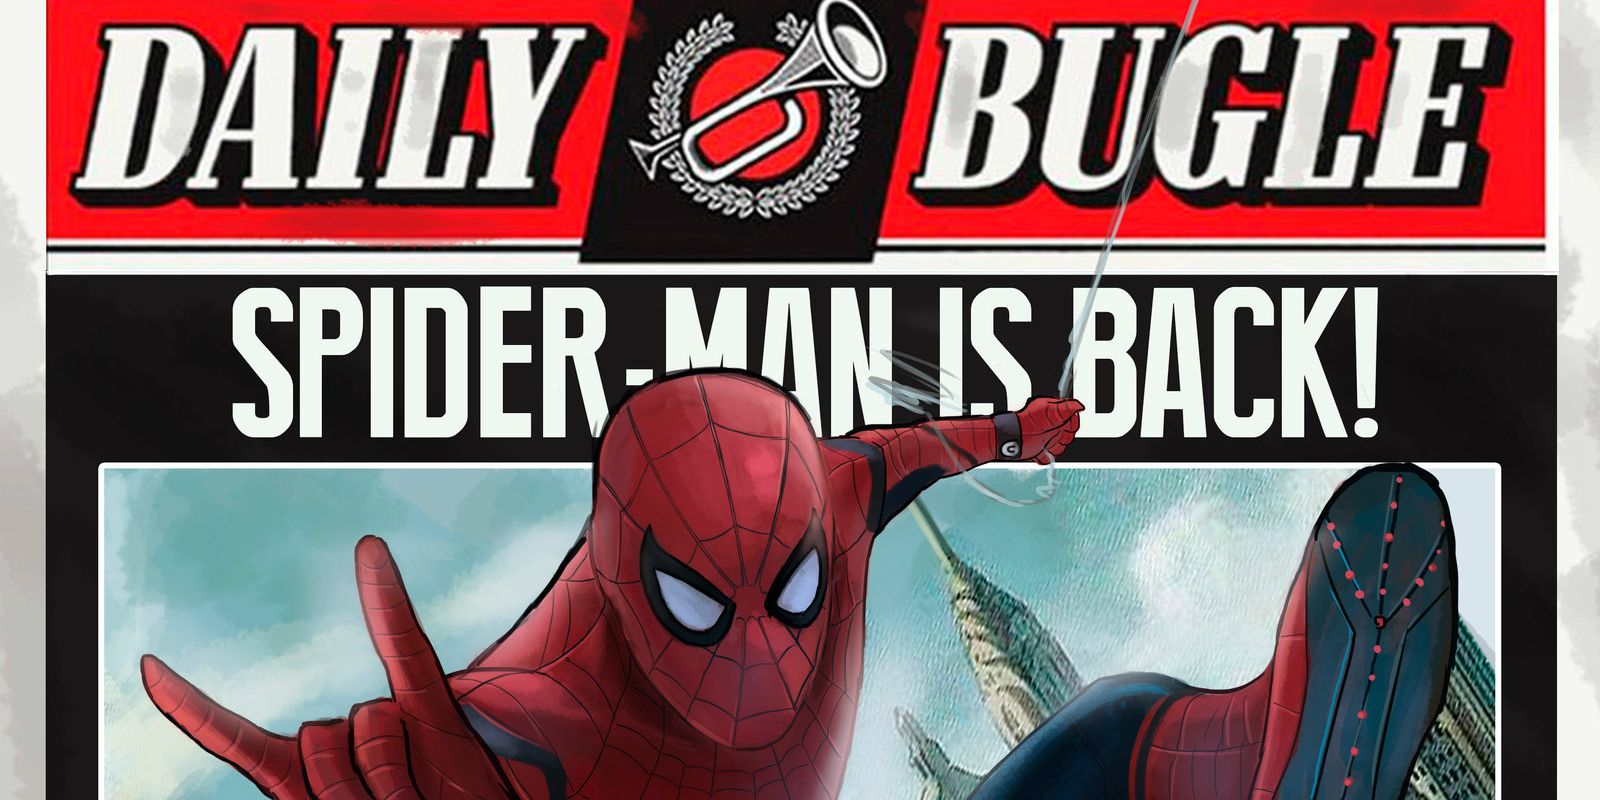 Disneyland Easter Egg Brings The Daily Bugle To The MCU